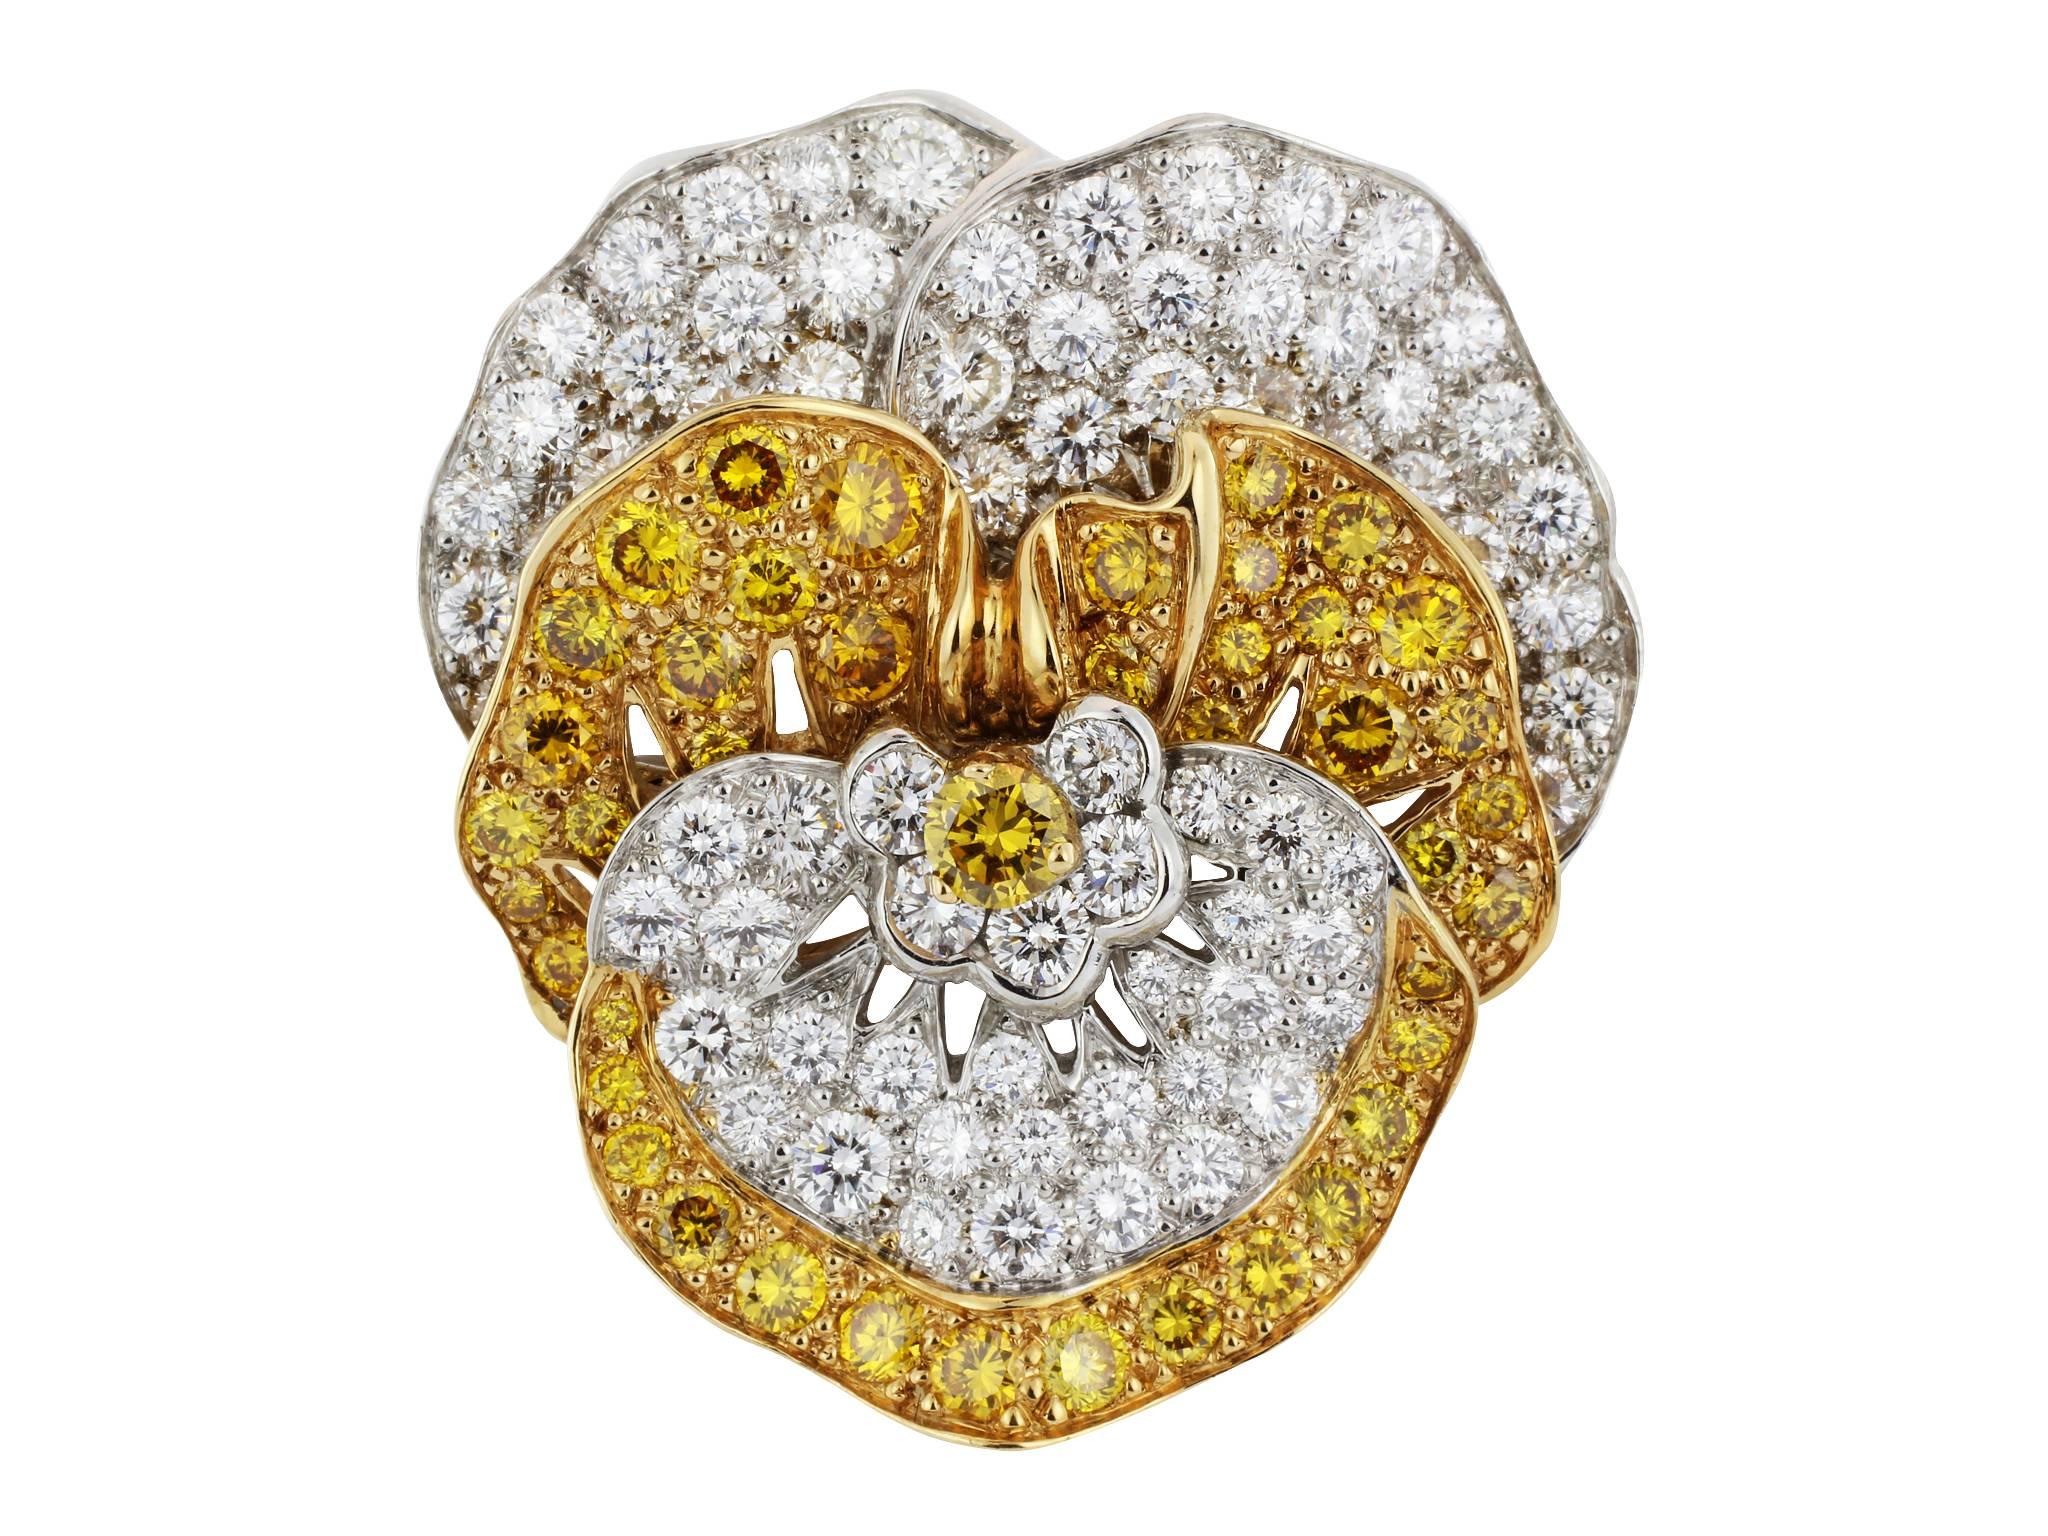 Part of the Shreve, Crump and Low Oscar Heyman Collection, the classic Oscar Heyman Pansy Pin has become a signature piece of their collection. Made in variations of different diamonds and colored stones, this exclusive pin has become synonymous